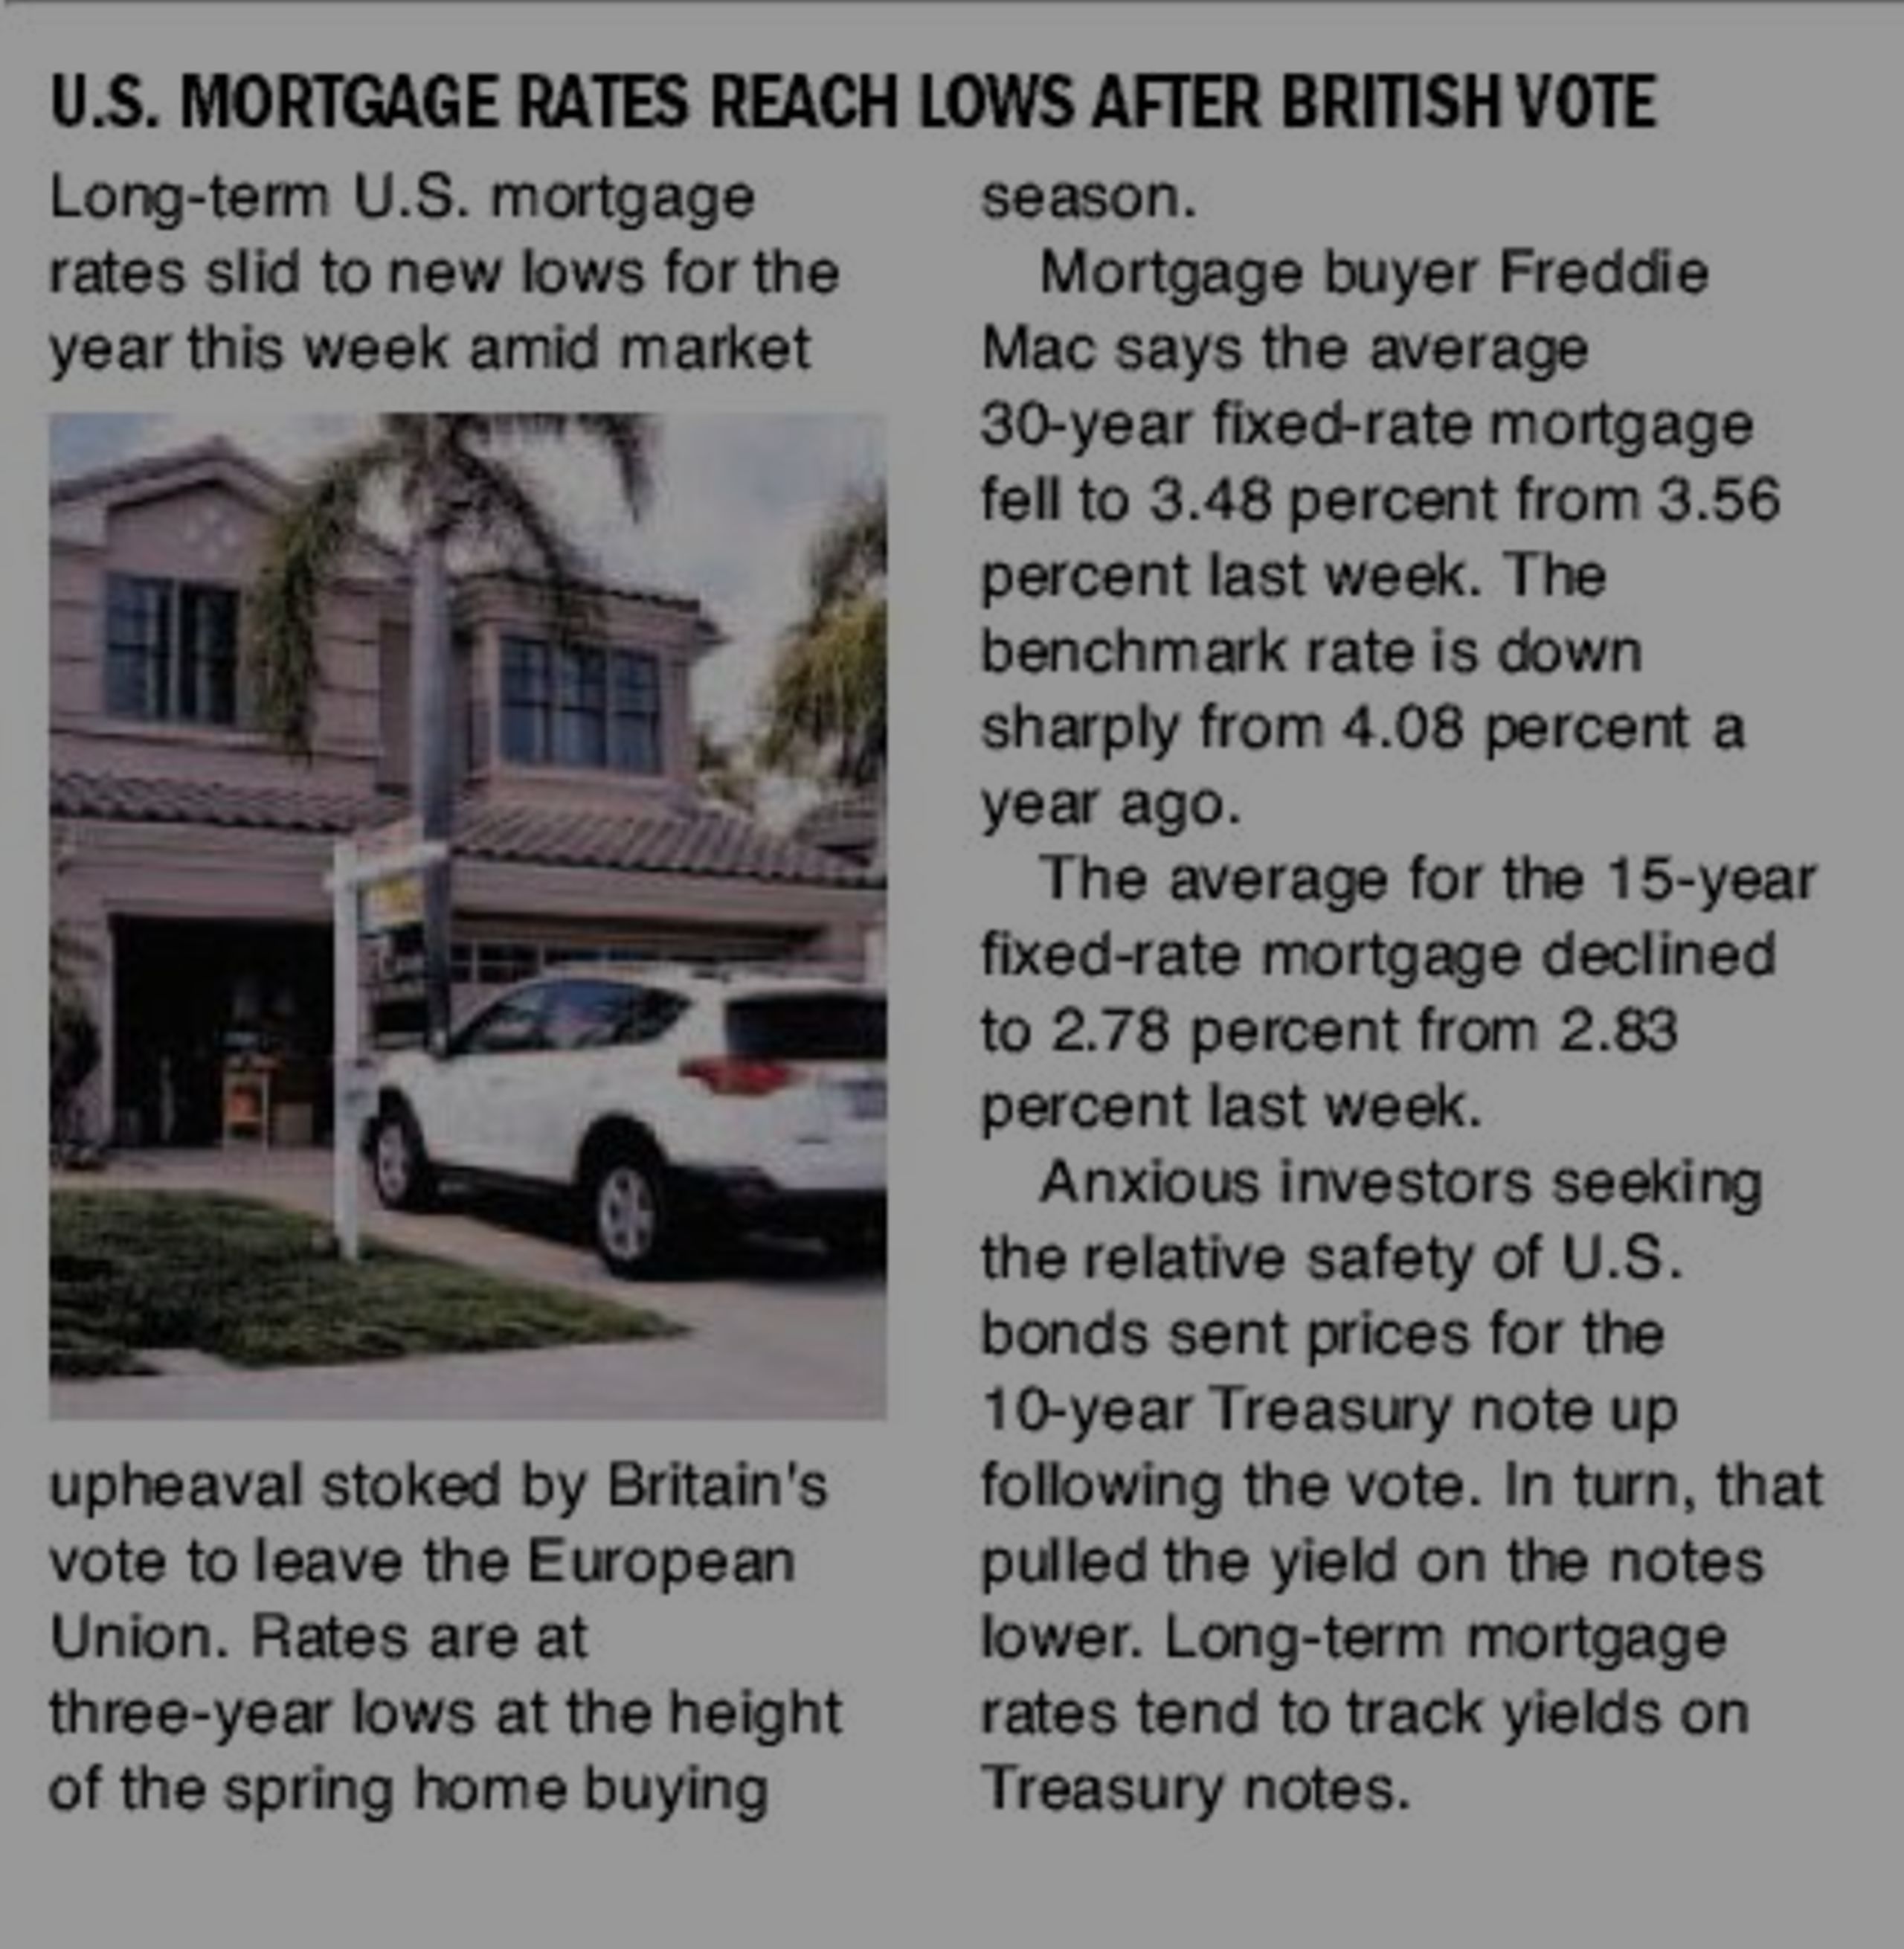 Long-term U.S. mortgage rates slid to new lows for the year this week amid market upheaval stoked by Britain&#8217;s vote to leave the European Union.